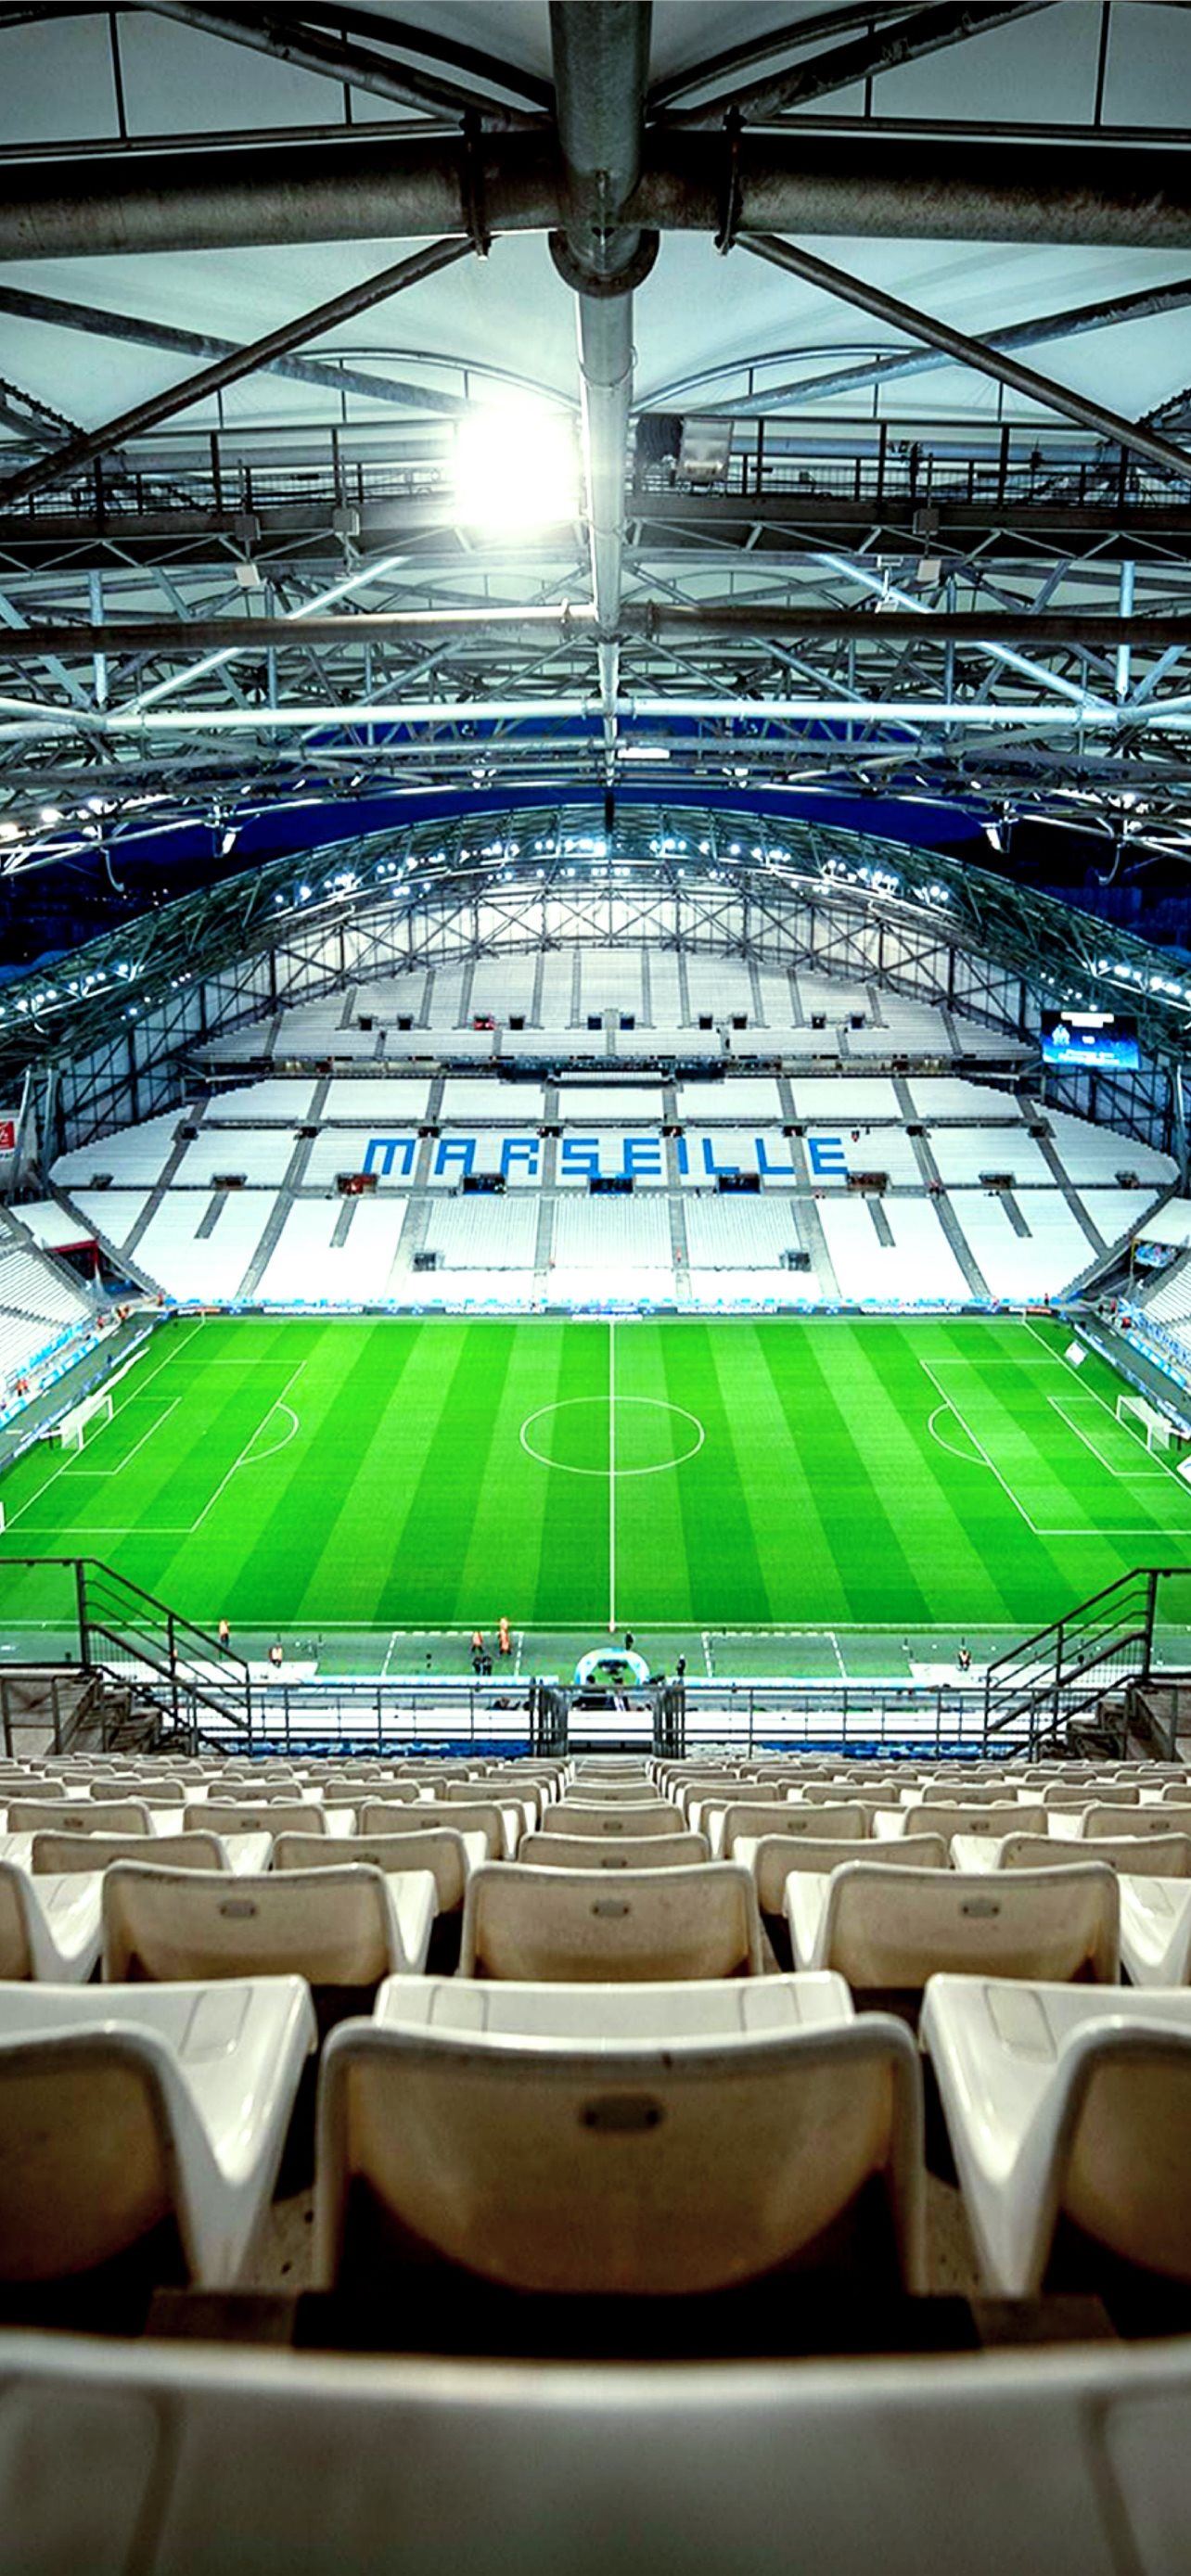 Olympique de marseille iphone wallpapers free download